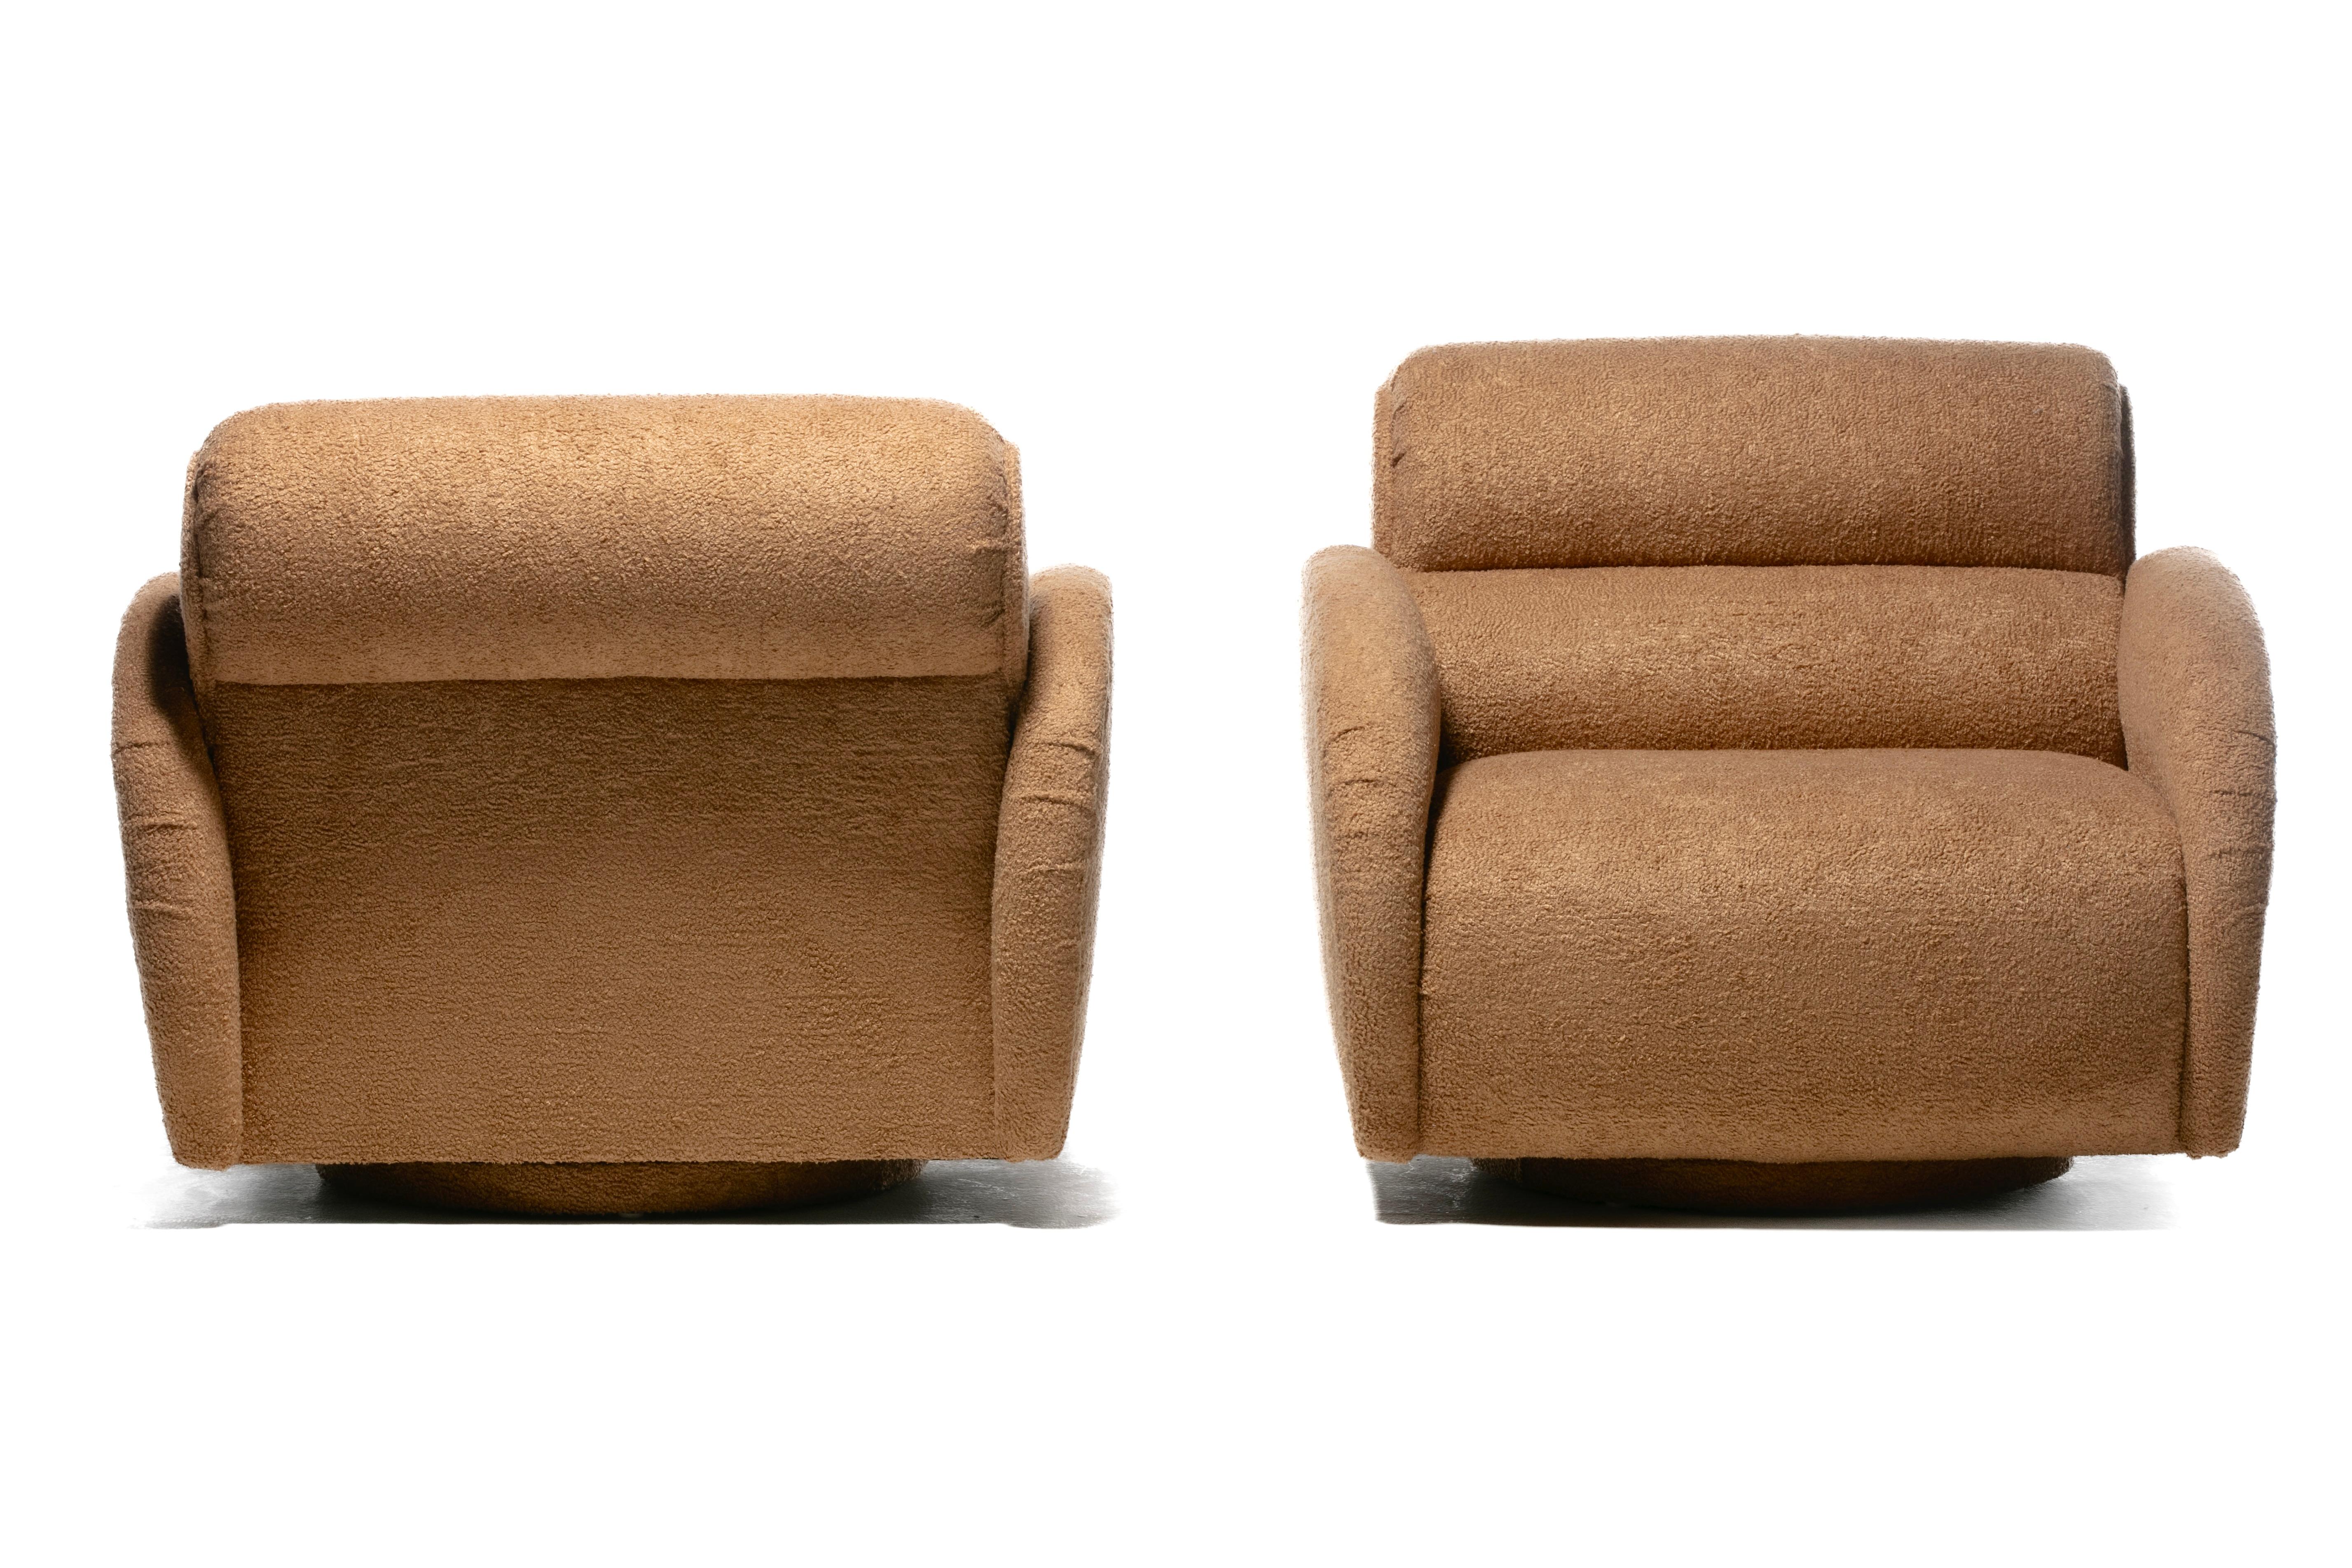 Large Scale Directional Post Modern Swivel Chairs & Ottoman in Mocha Fabric For Sale 1